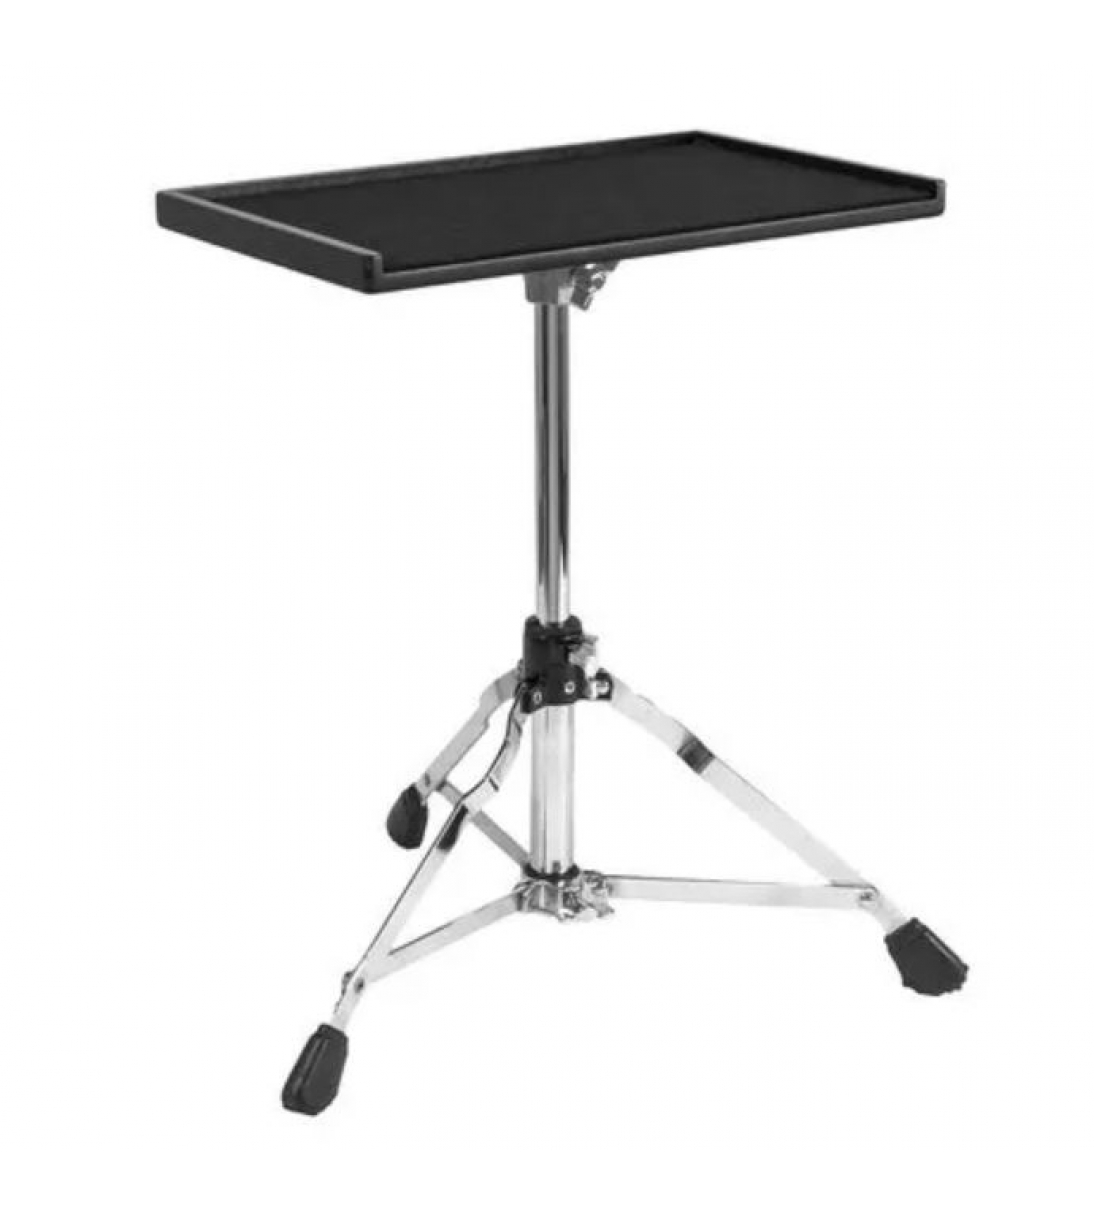 G-SES Sidekick Essentials Wood Table with Stand